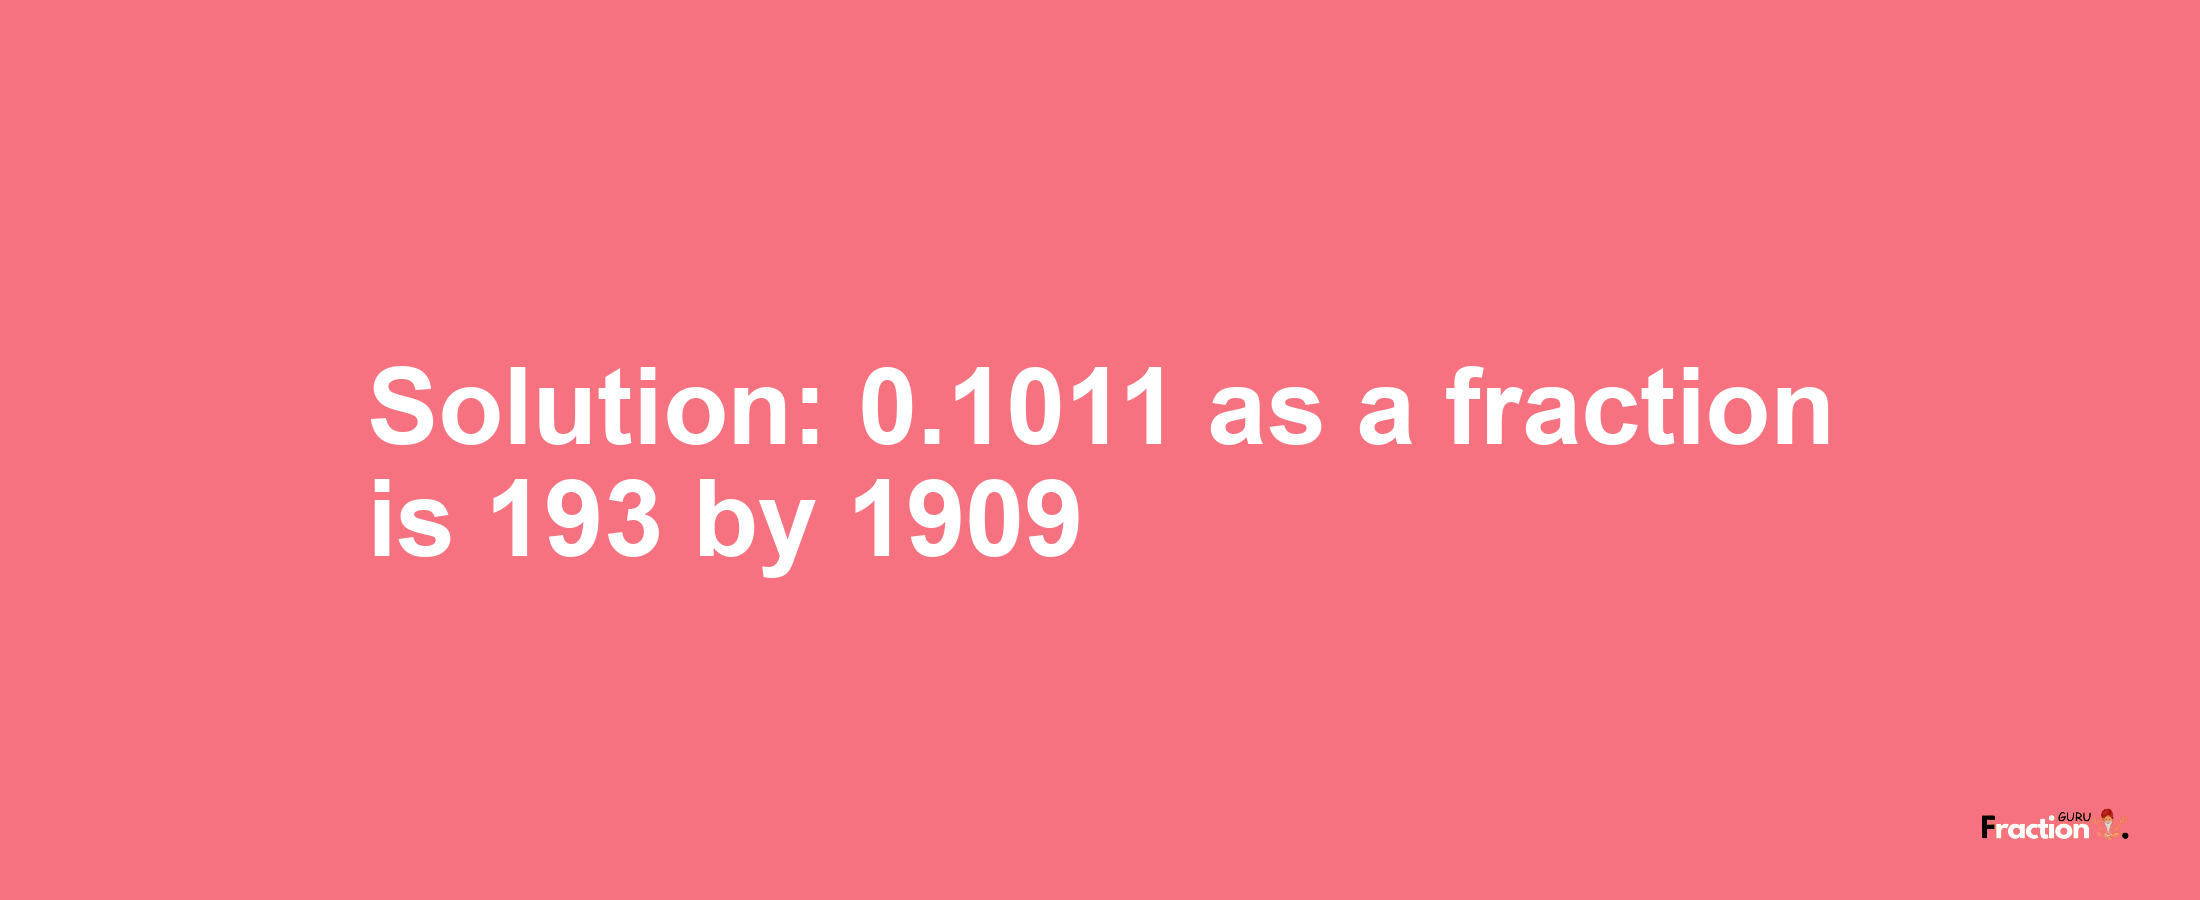 Solution:0.1011 as a fraction is 193/1909